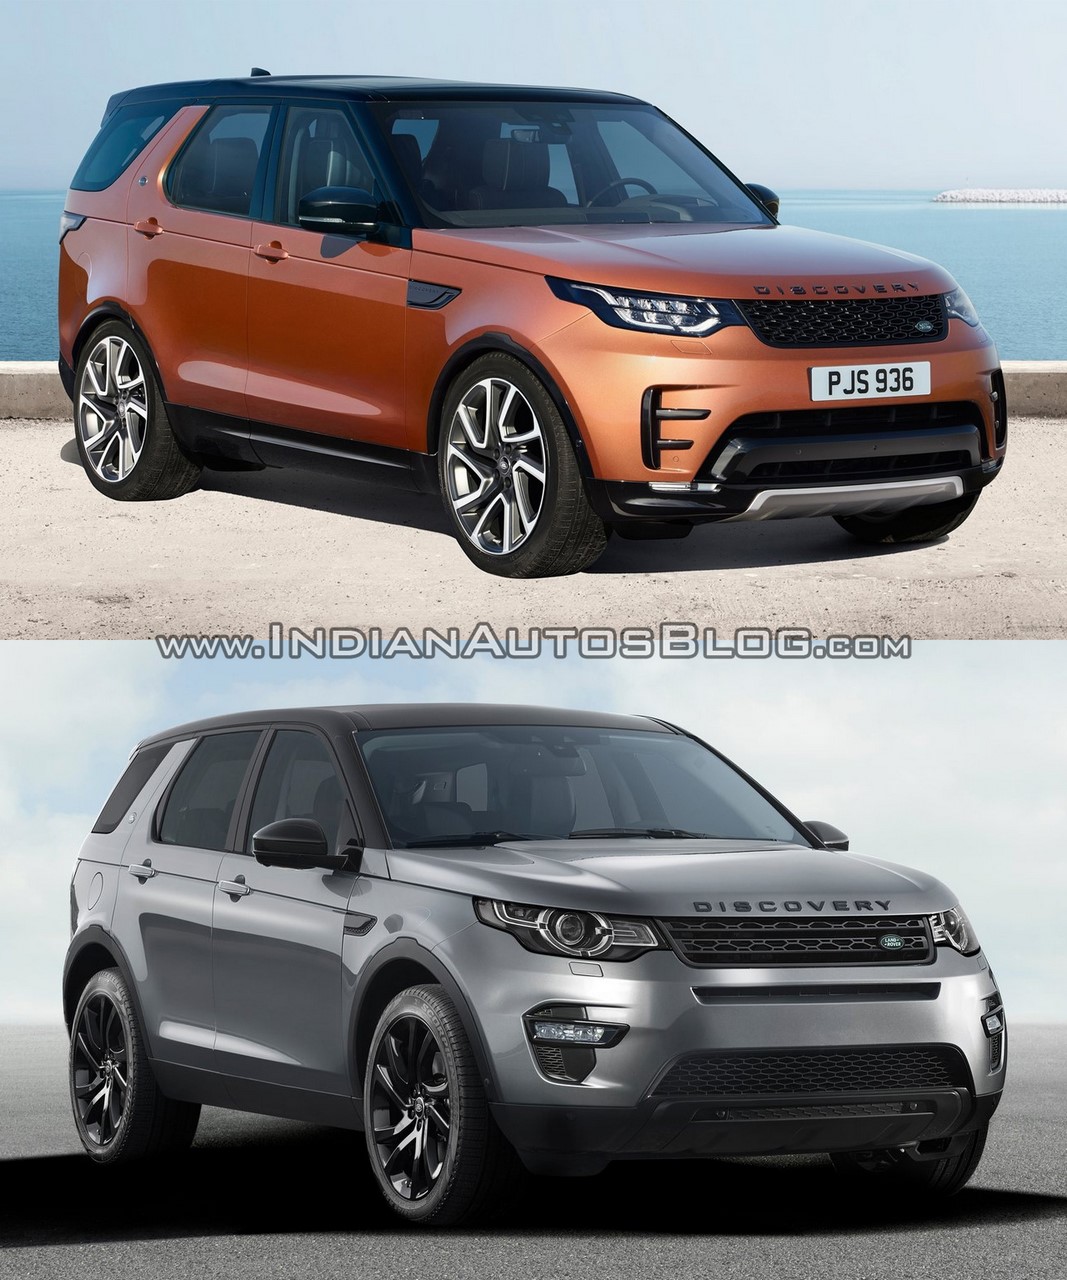 2017-land-rover-discovery-vs-land-rover-discovery-sport-front-three-quarters-right-side